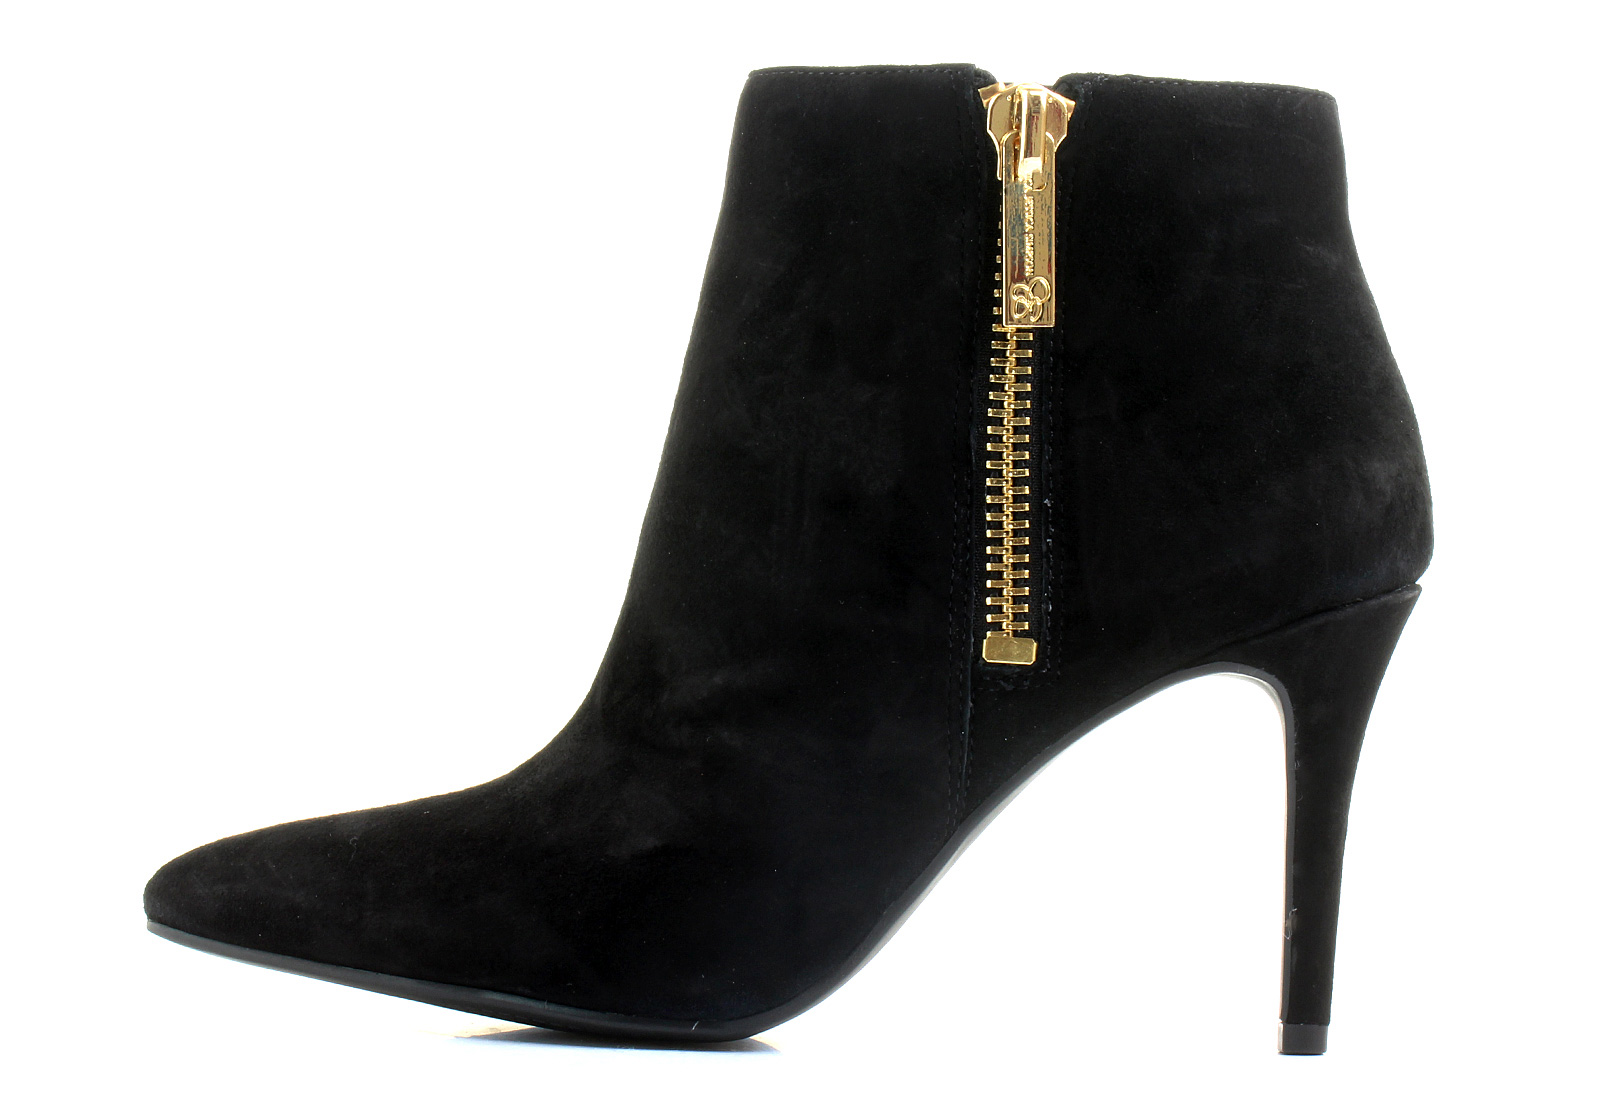 Jessica Simpson Boots - Lafay - lafay-blk - Online shop for sneakers, shoes and boots